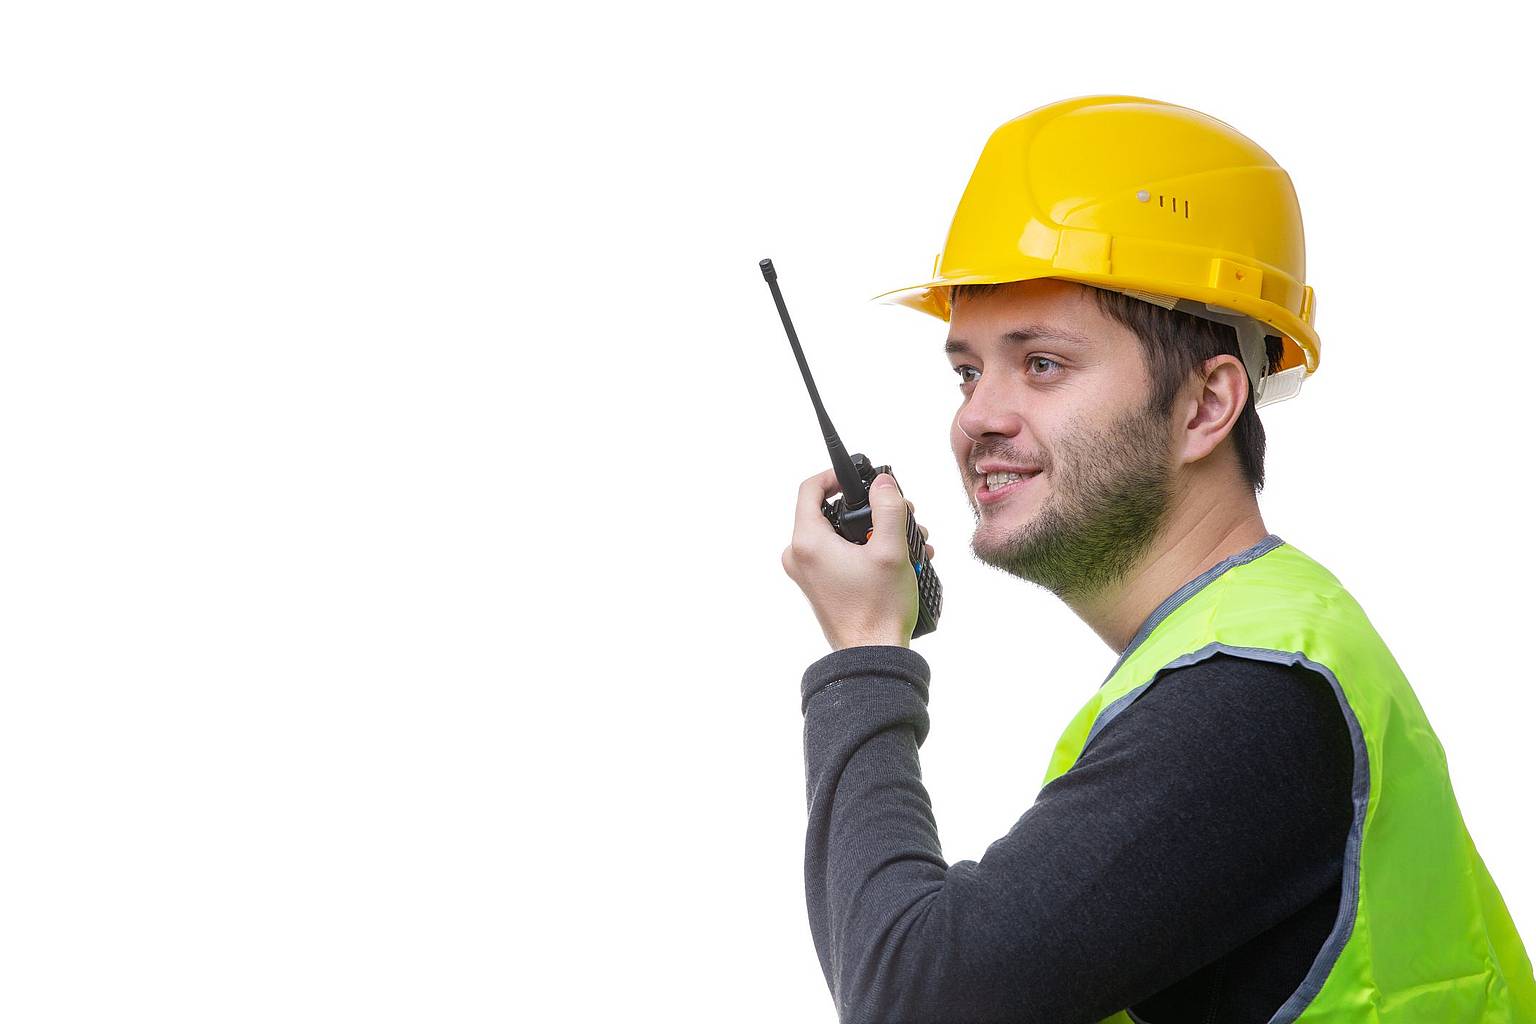 Contractor speaking into a two-way radio with a sarcastic grin.